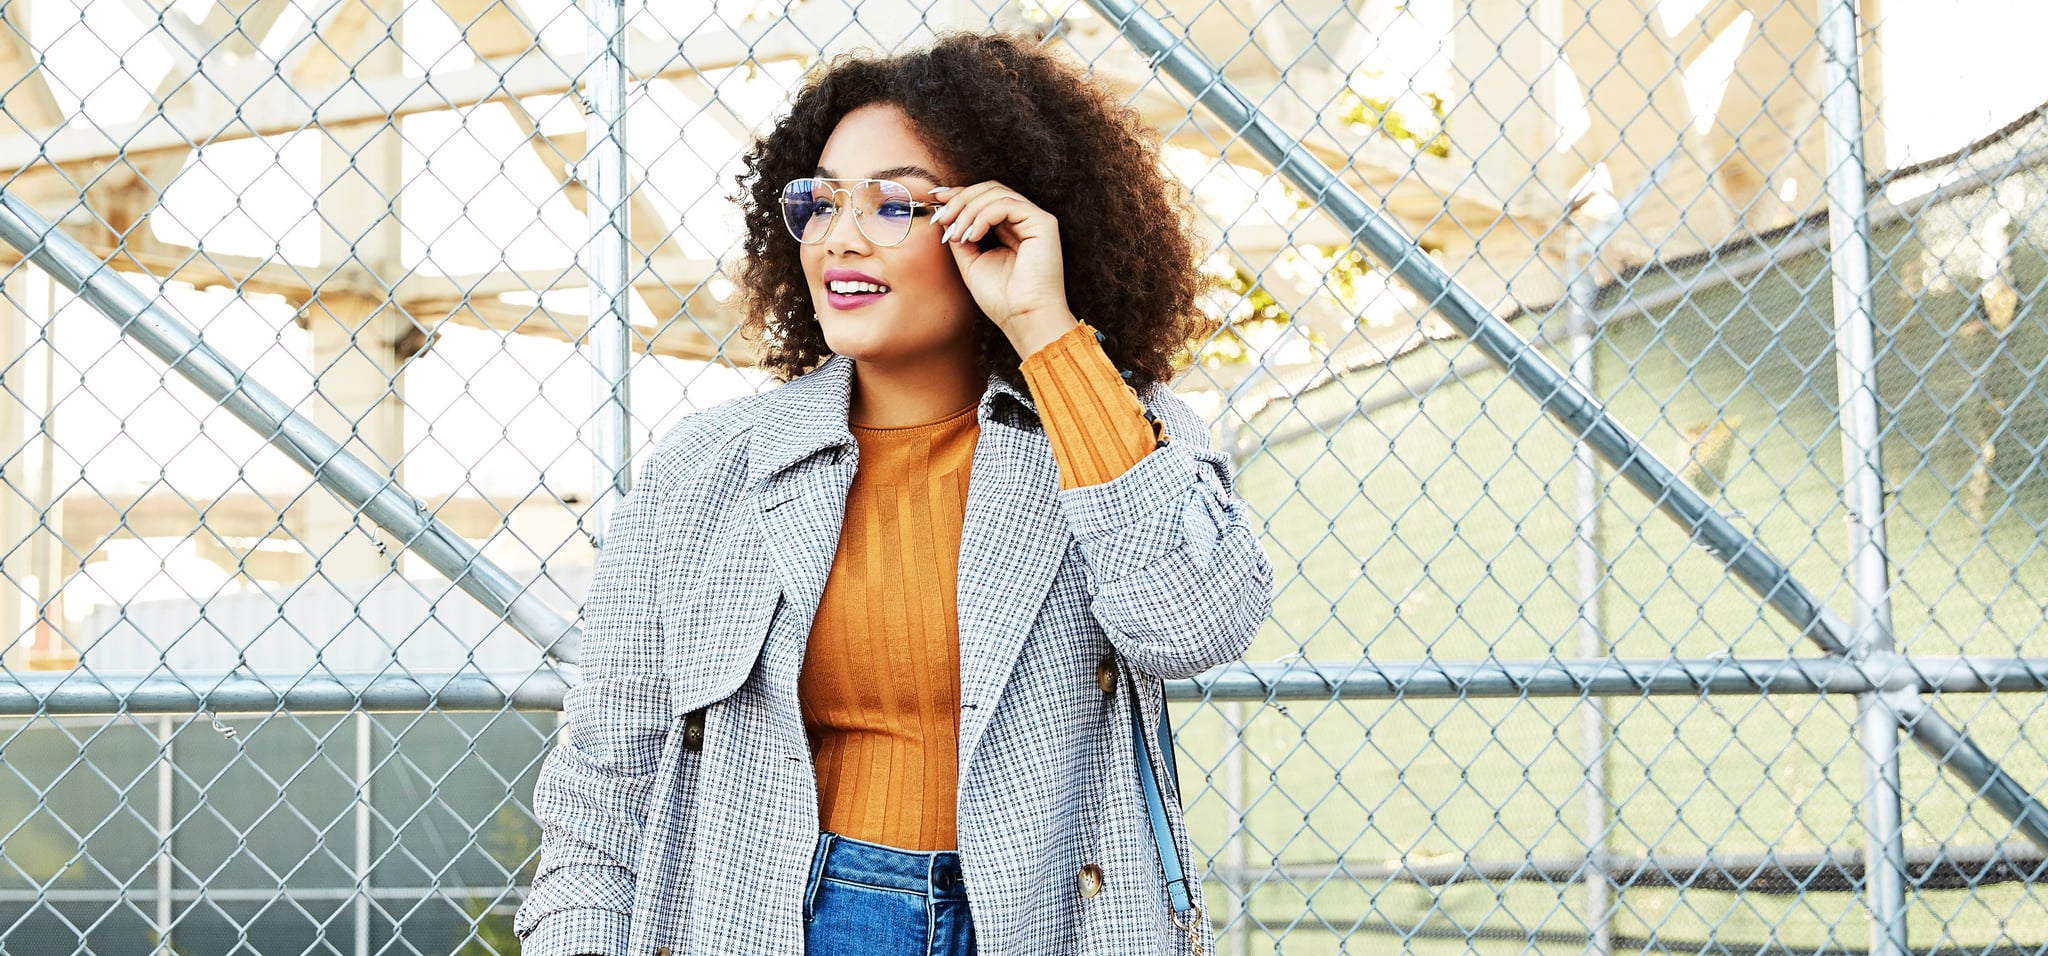 Creative Ways to Let Your Outfits Do All the Talking This Fall